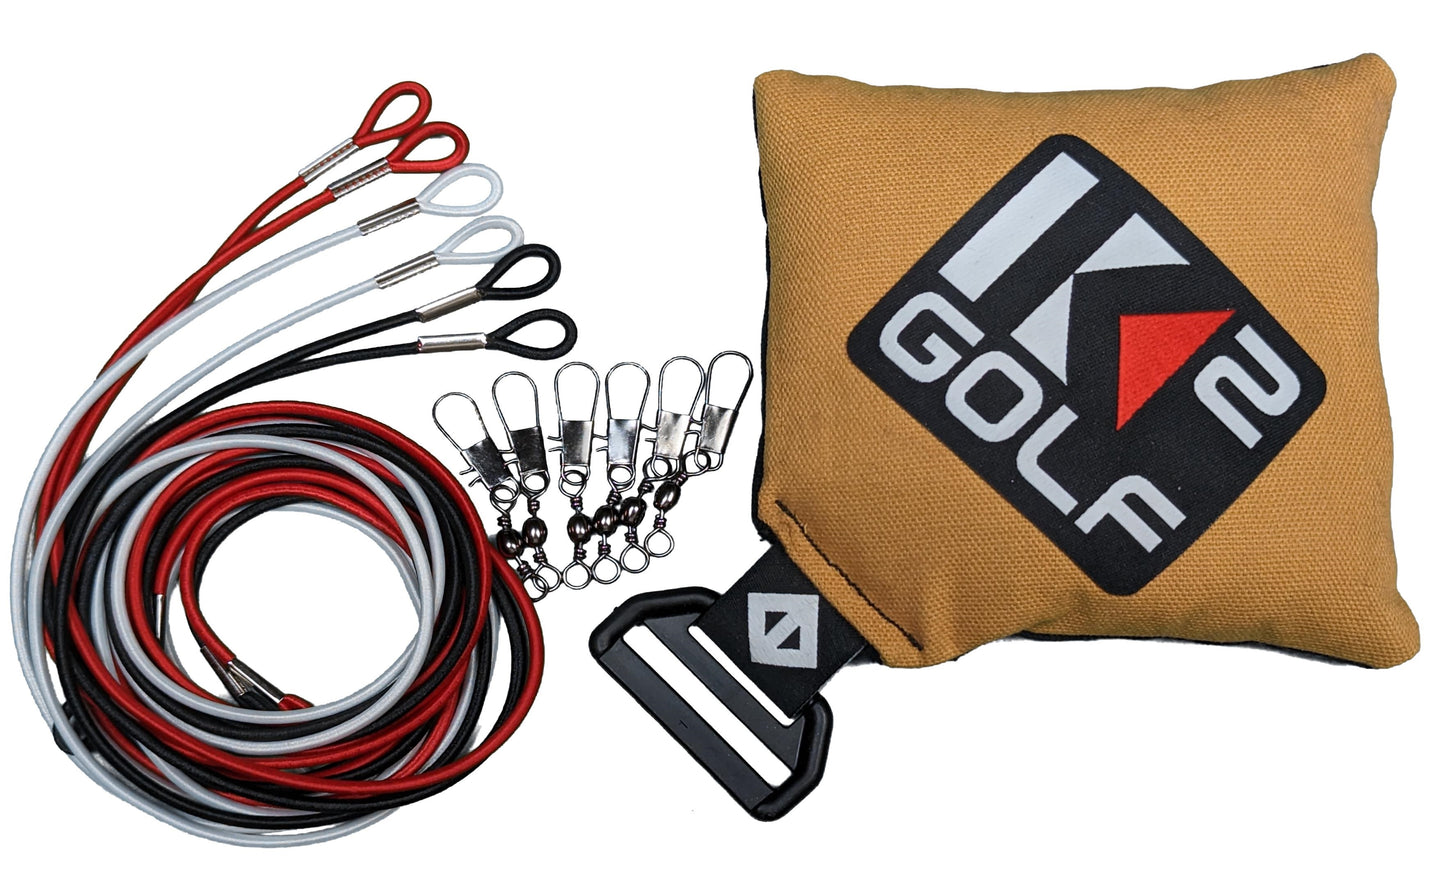 TETHER PACK (Anchor, 9 Bungee Cords and 9 Swivel Clips)